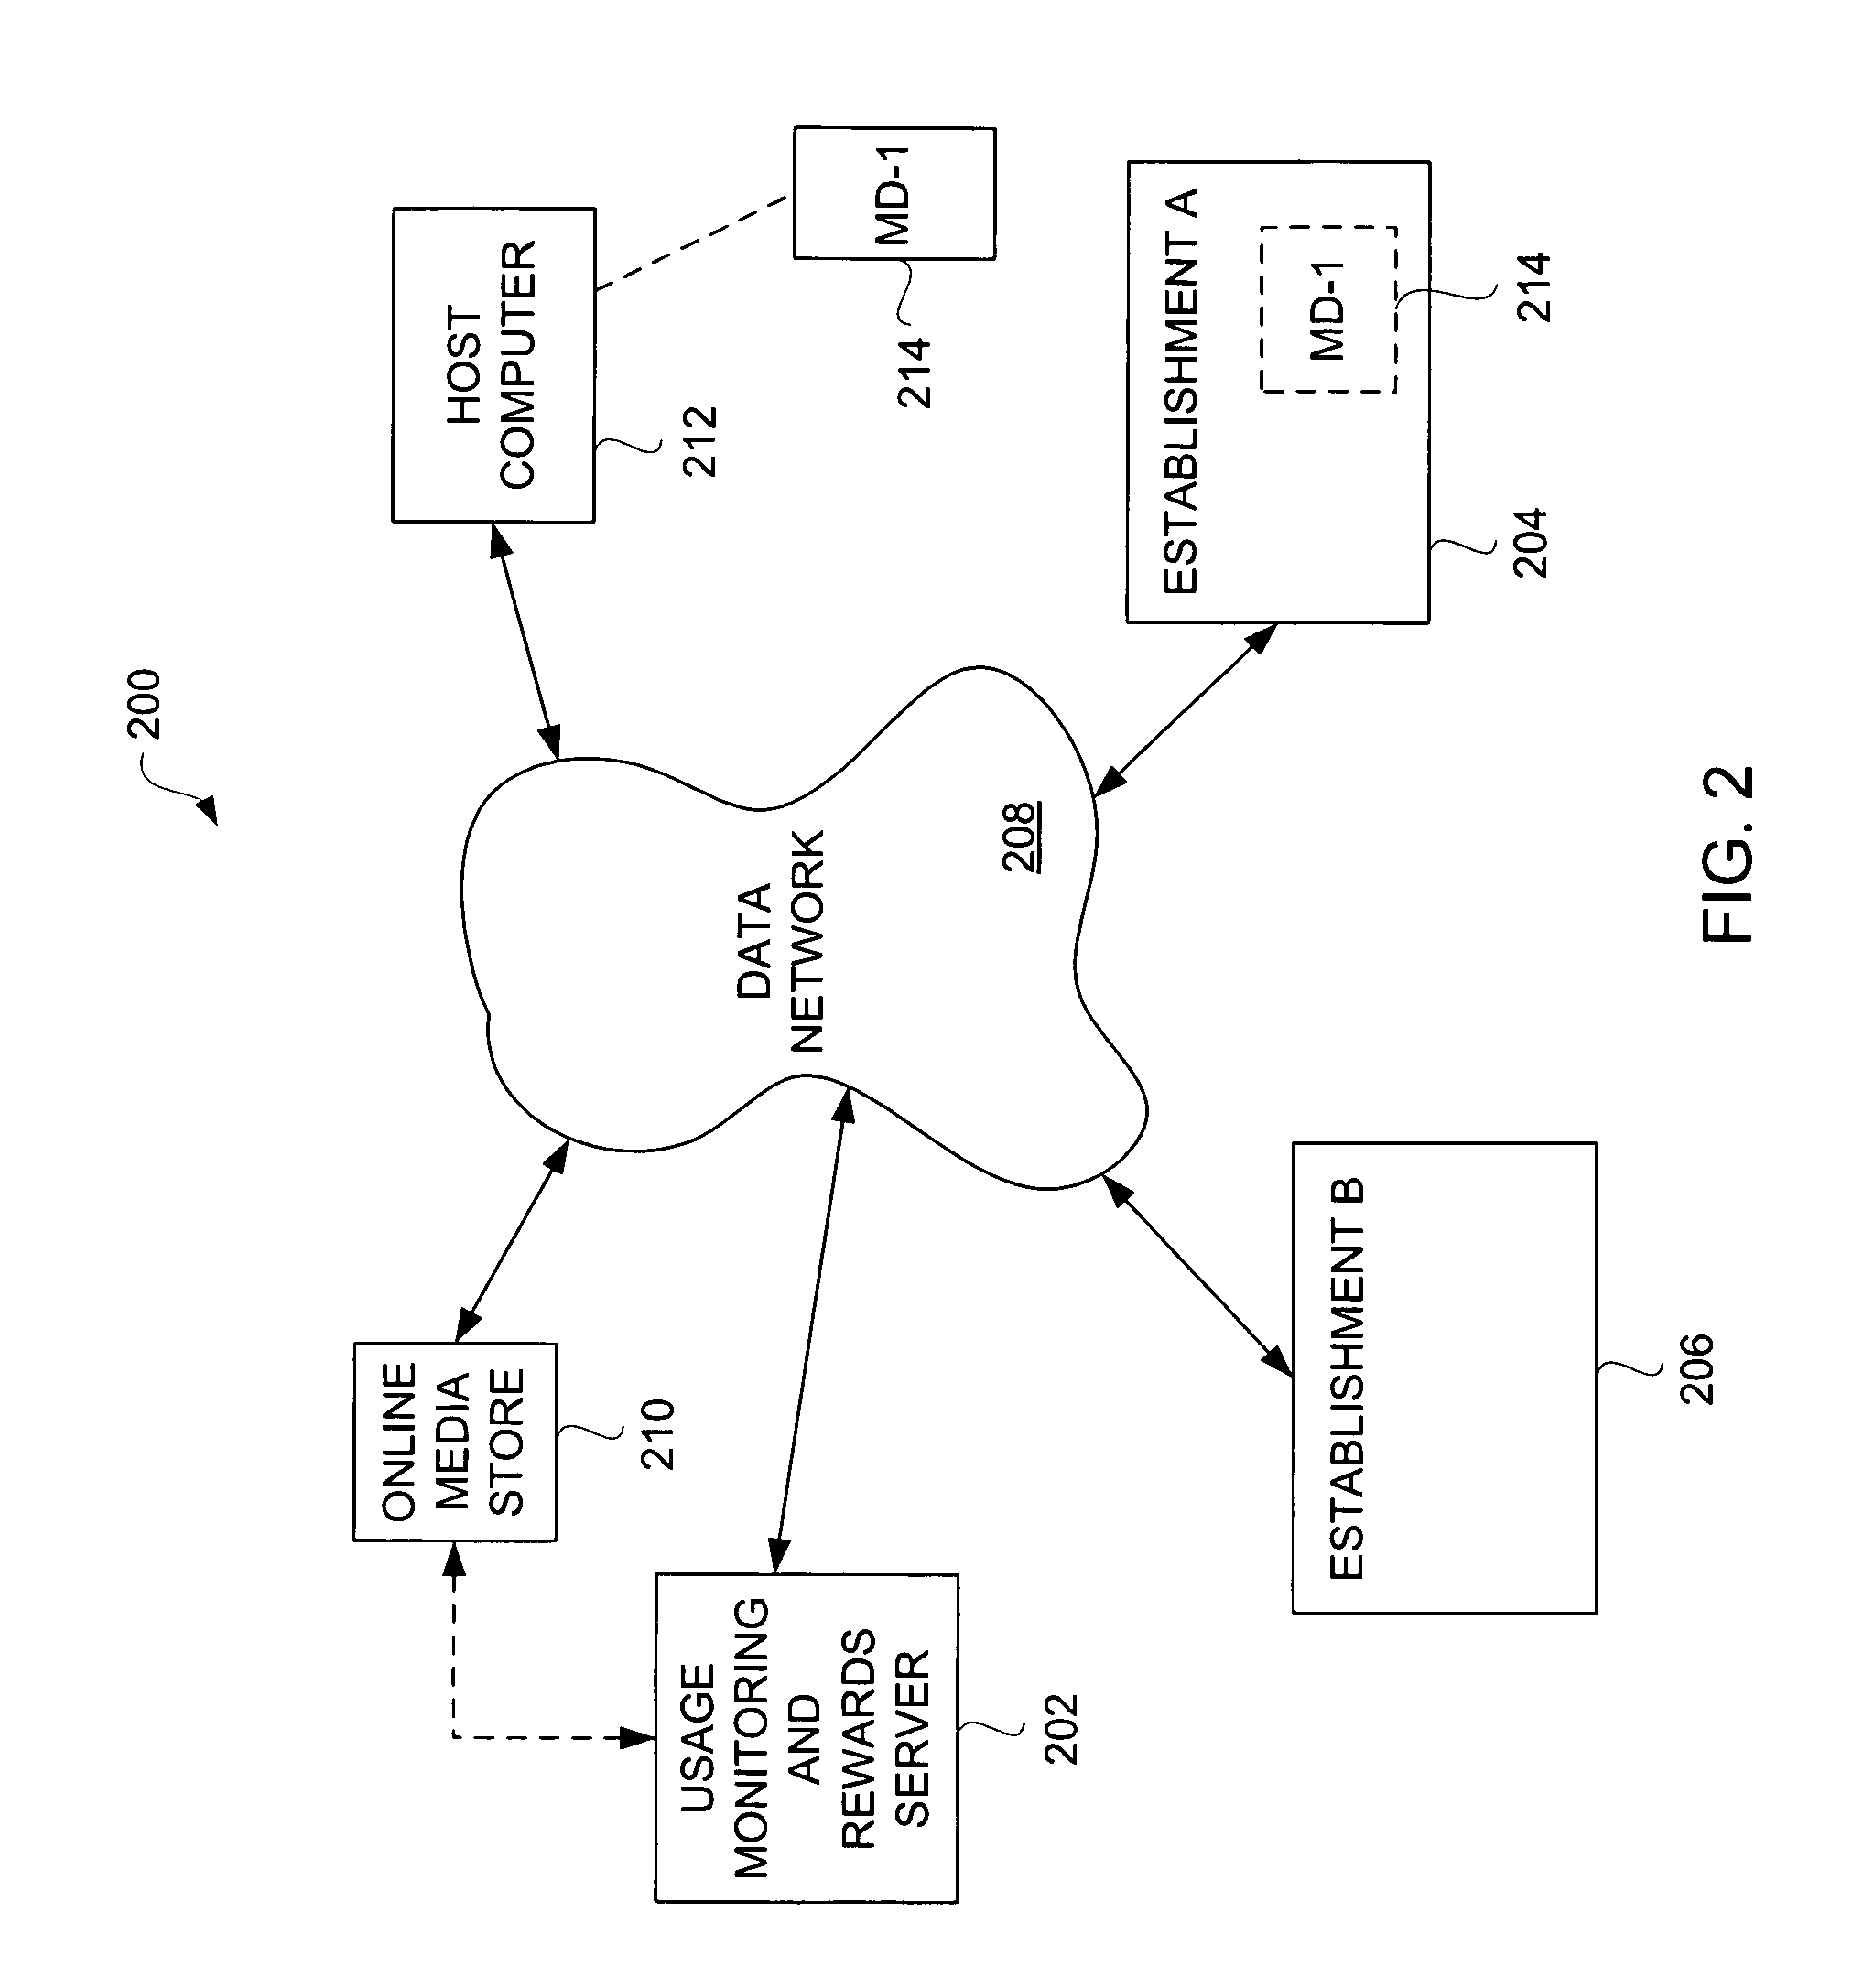 Monitoring Capabilities for Mobile Electronic Devices